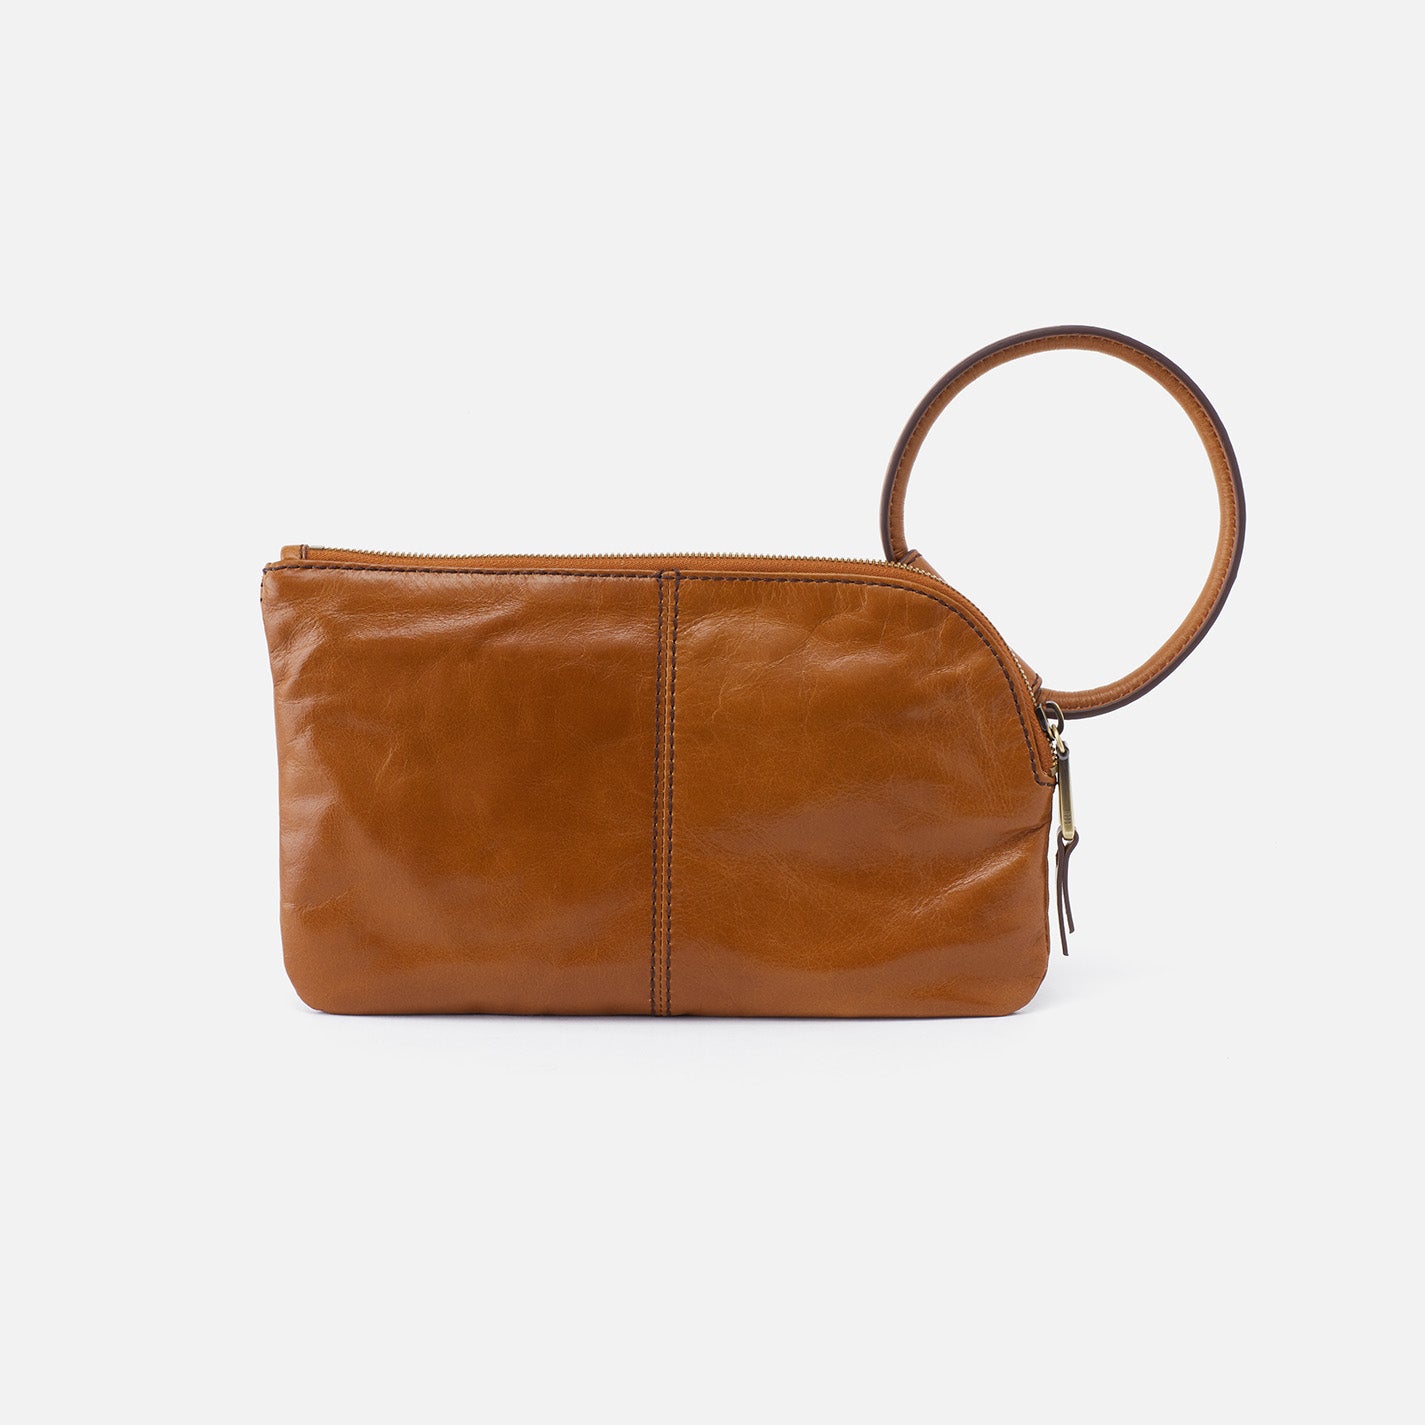 Sable Wristlet in Polished Leather - Truffle – HOBO